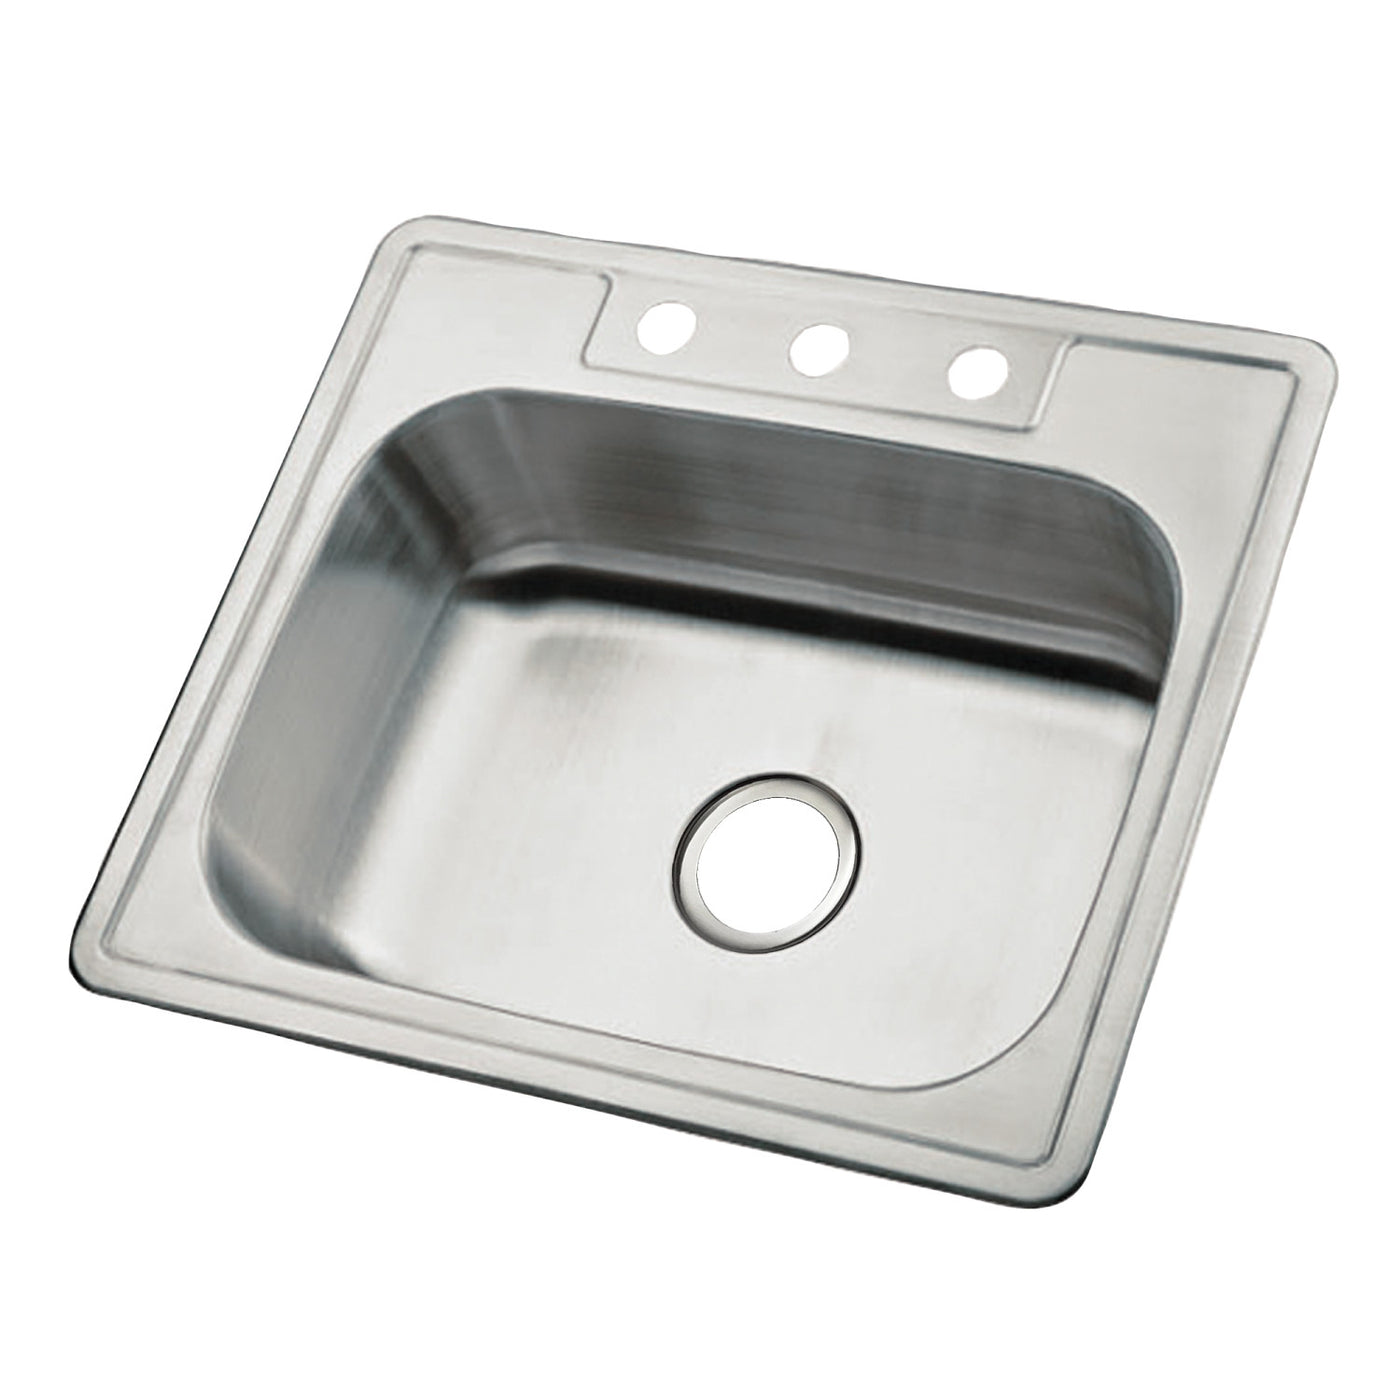 Elements of Design E25228BN 25" Stainless Steel Self-Rimming Single Bowl Drop-In Kitchen Sink, Brushed